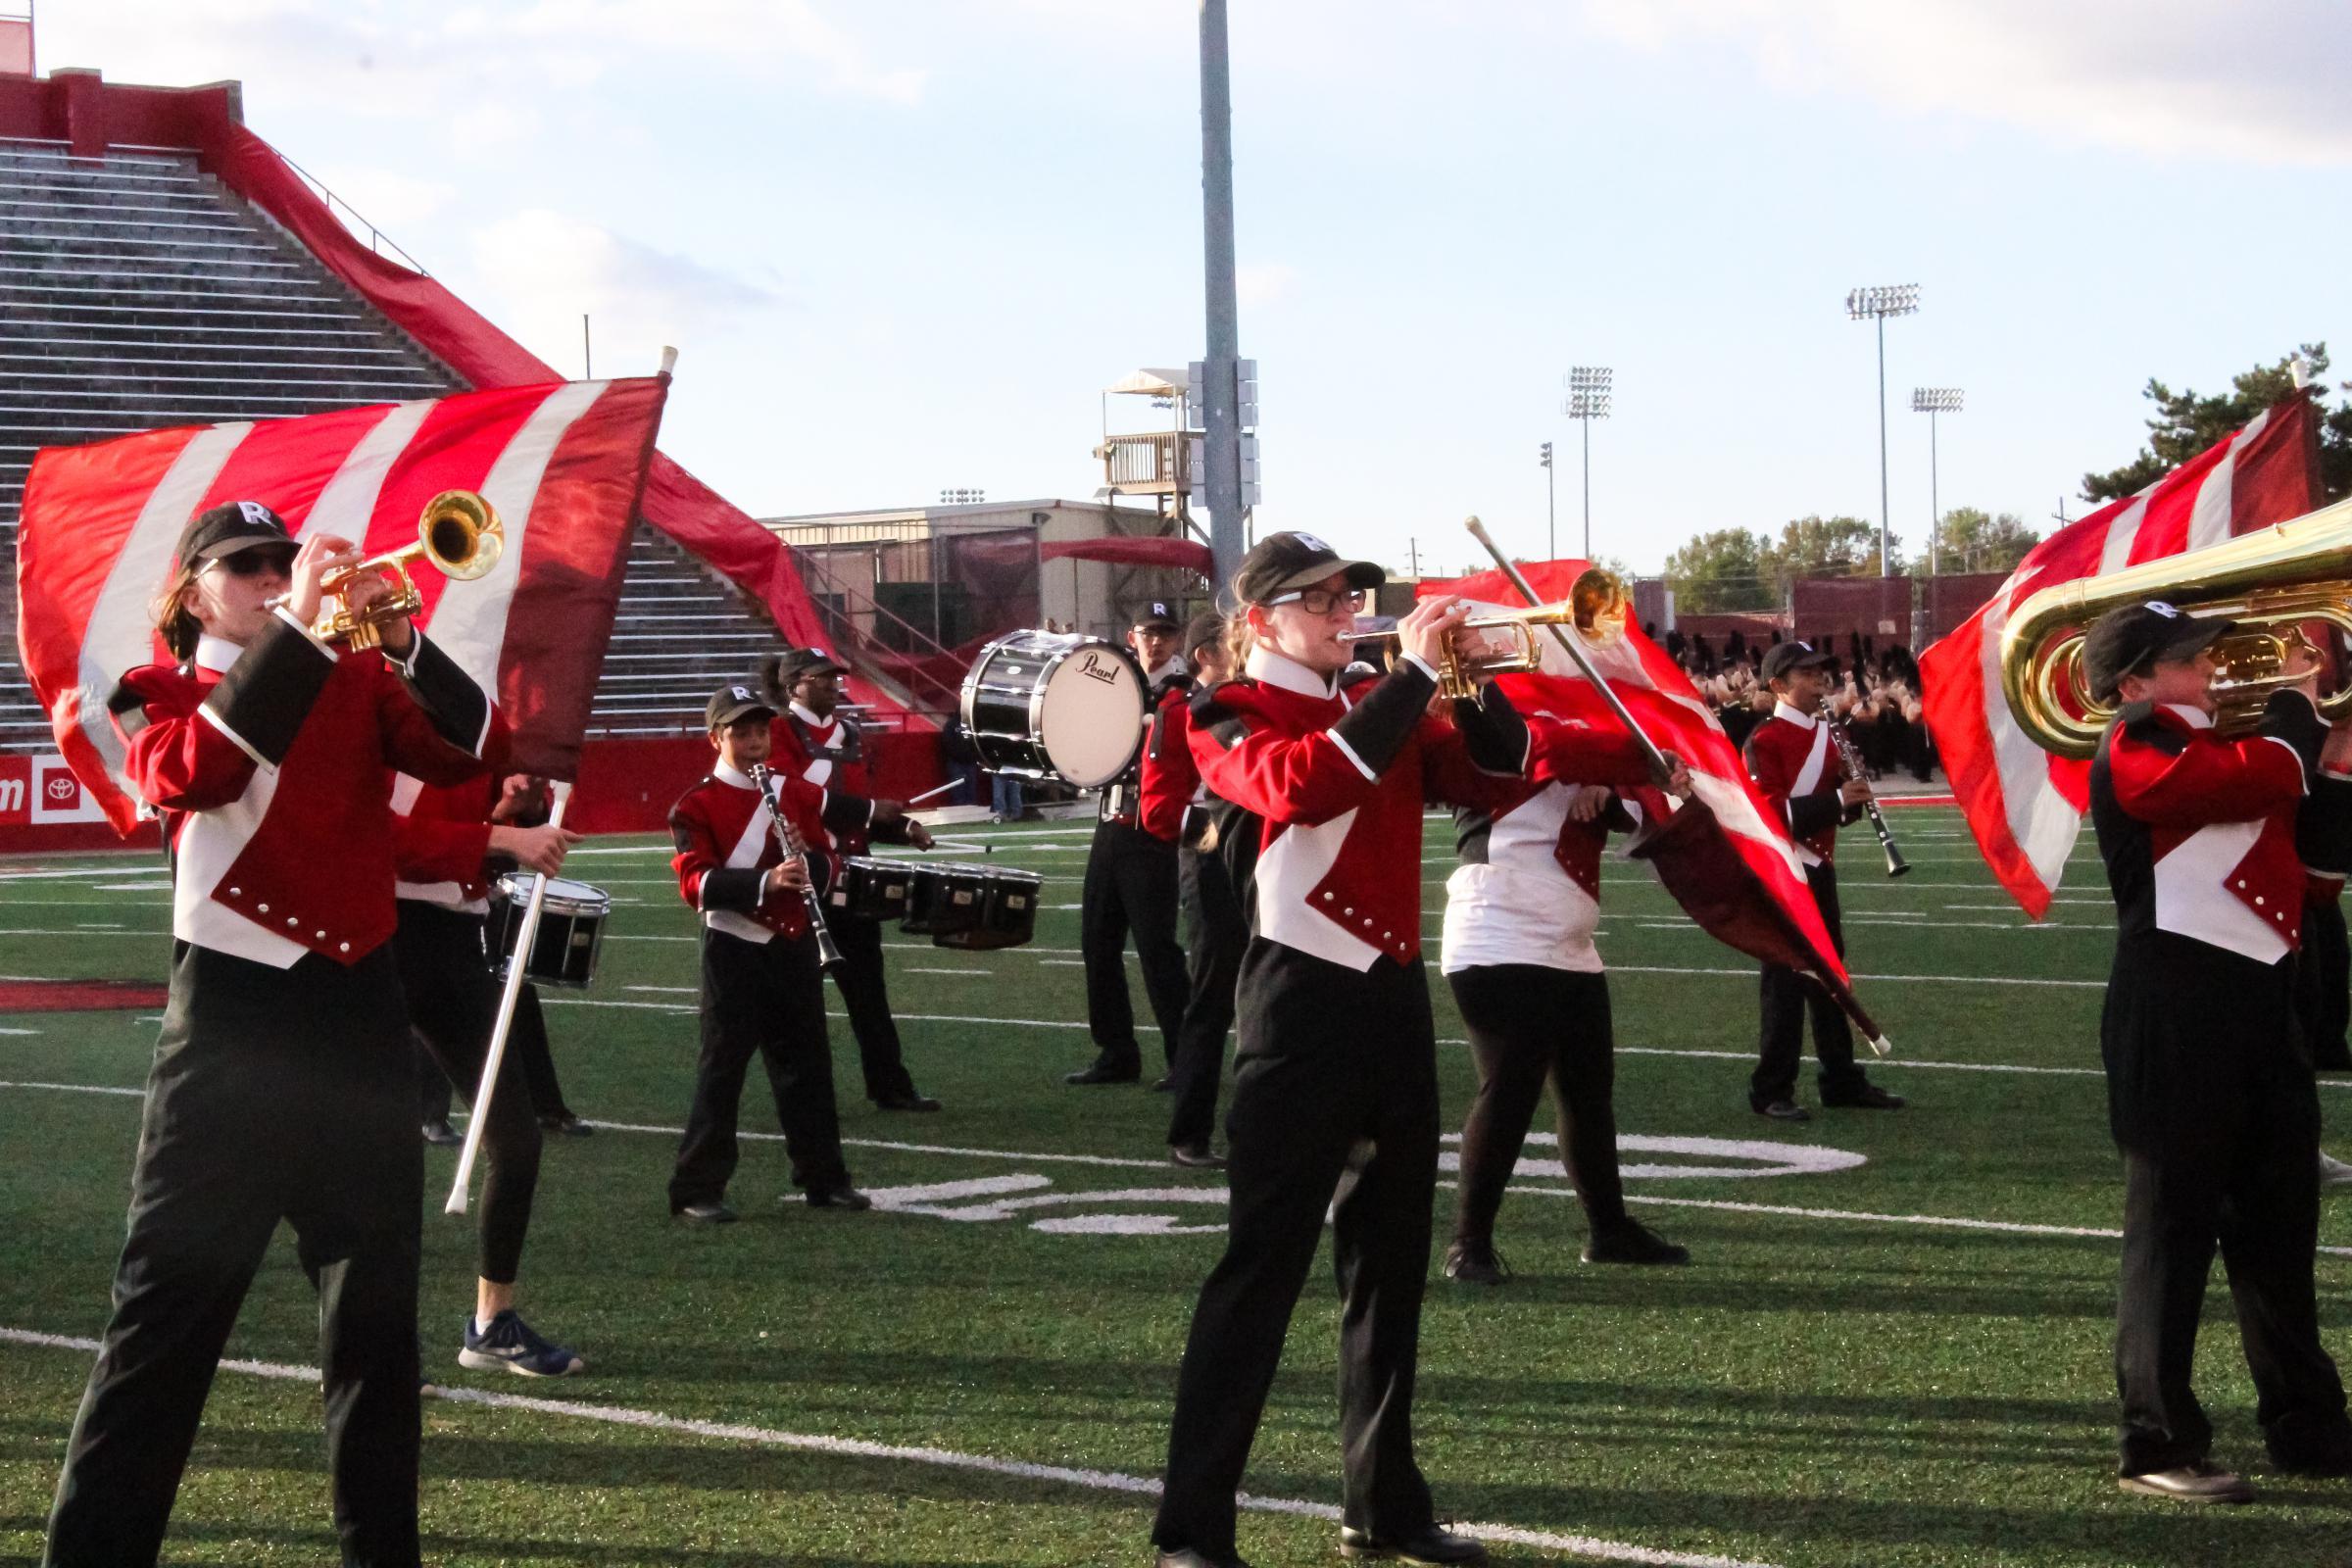 Illinois State University Drumline Logo - Photos: Marching Bands Compete At State Championships | WGLT